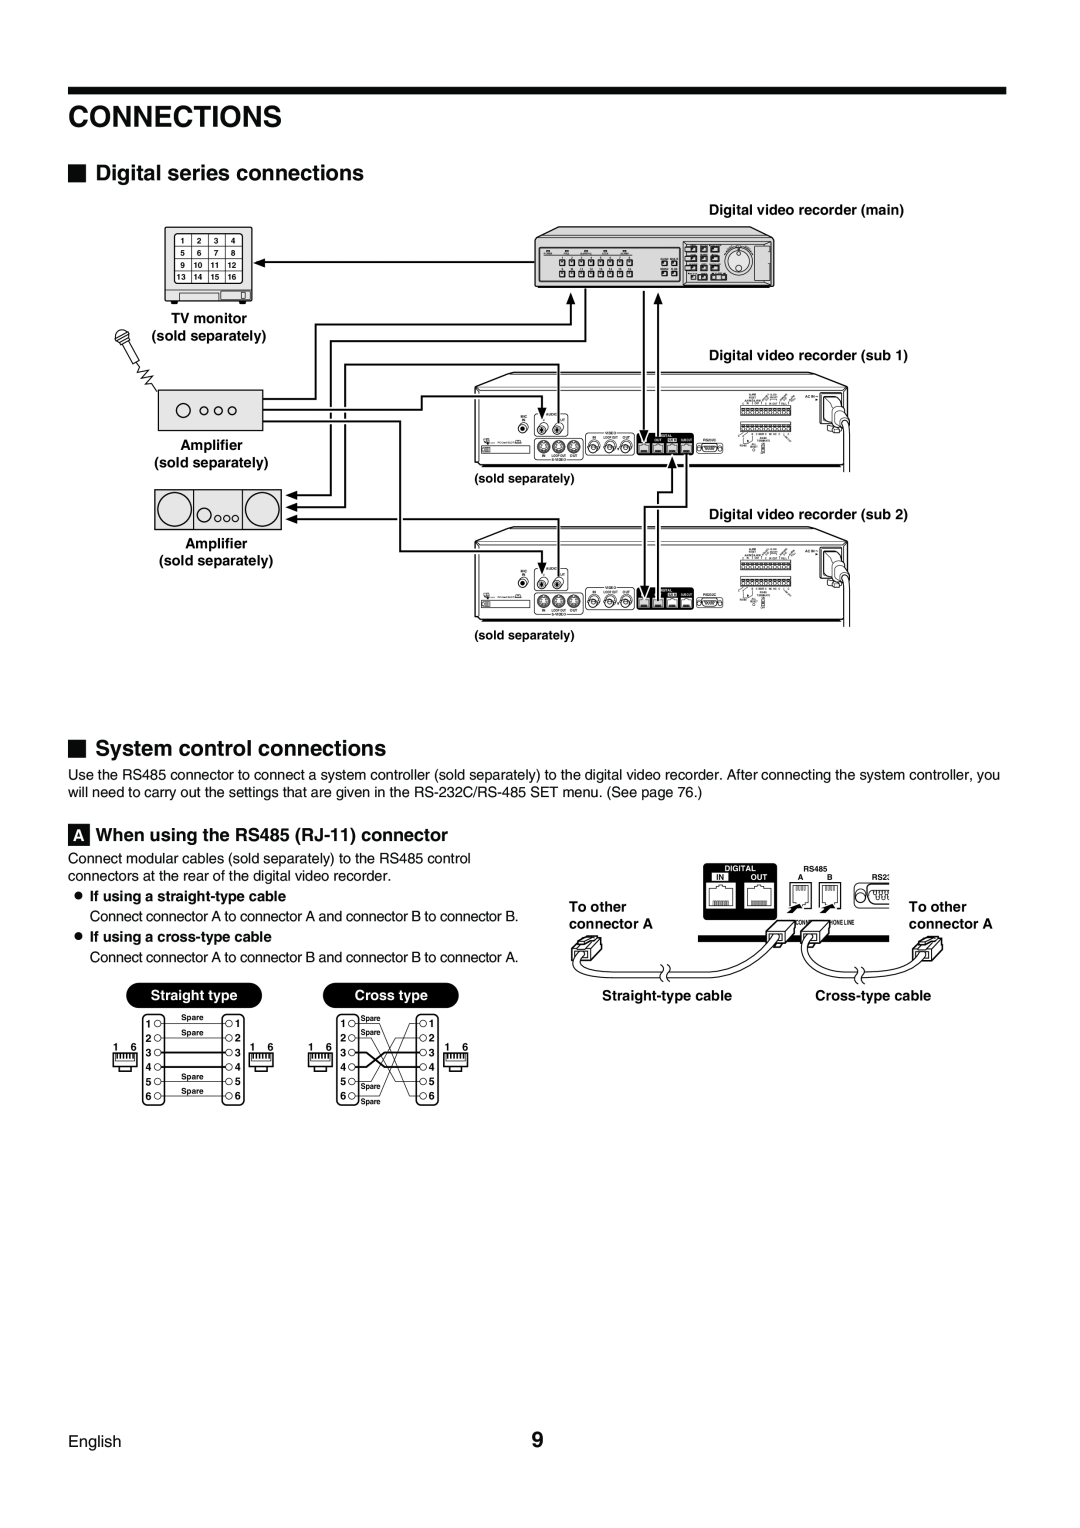 Sanyo DSR-3009P instruction manual Connections, Digital series connections, System control connections 